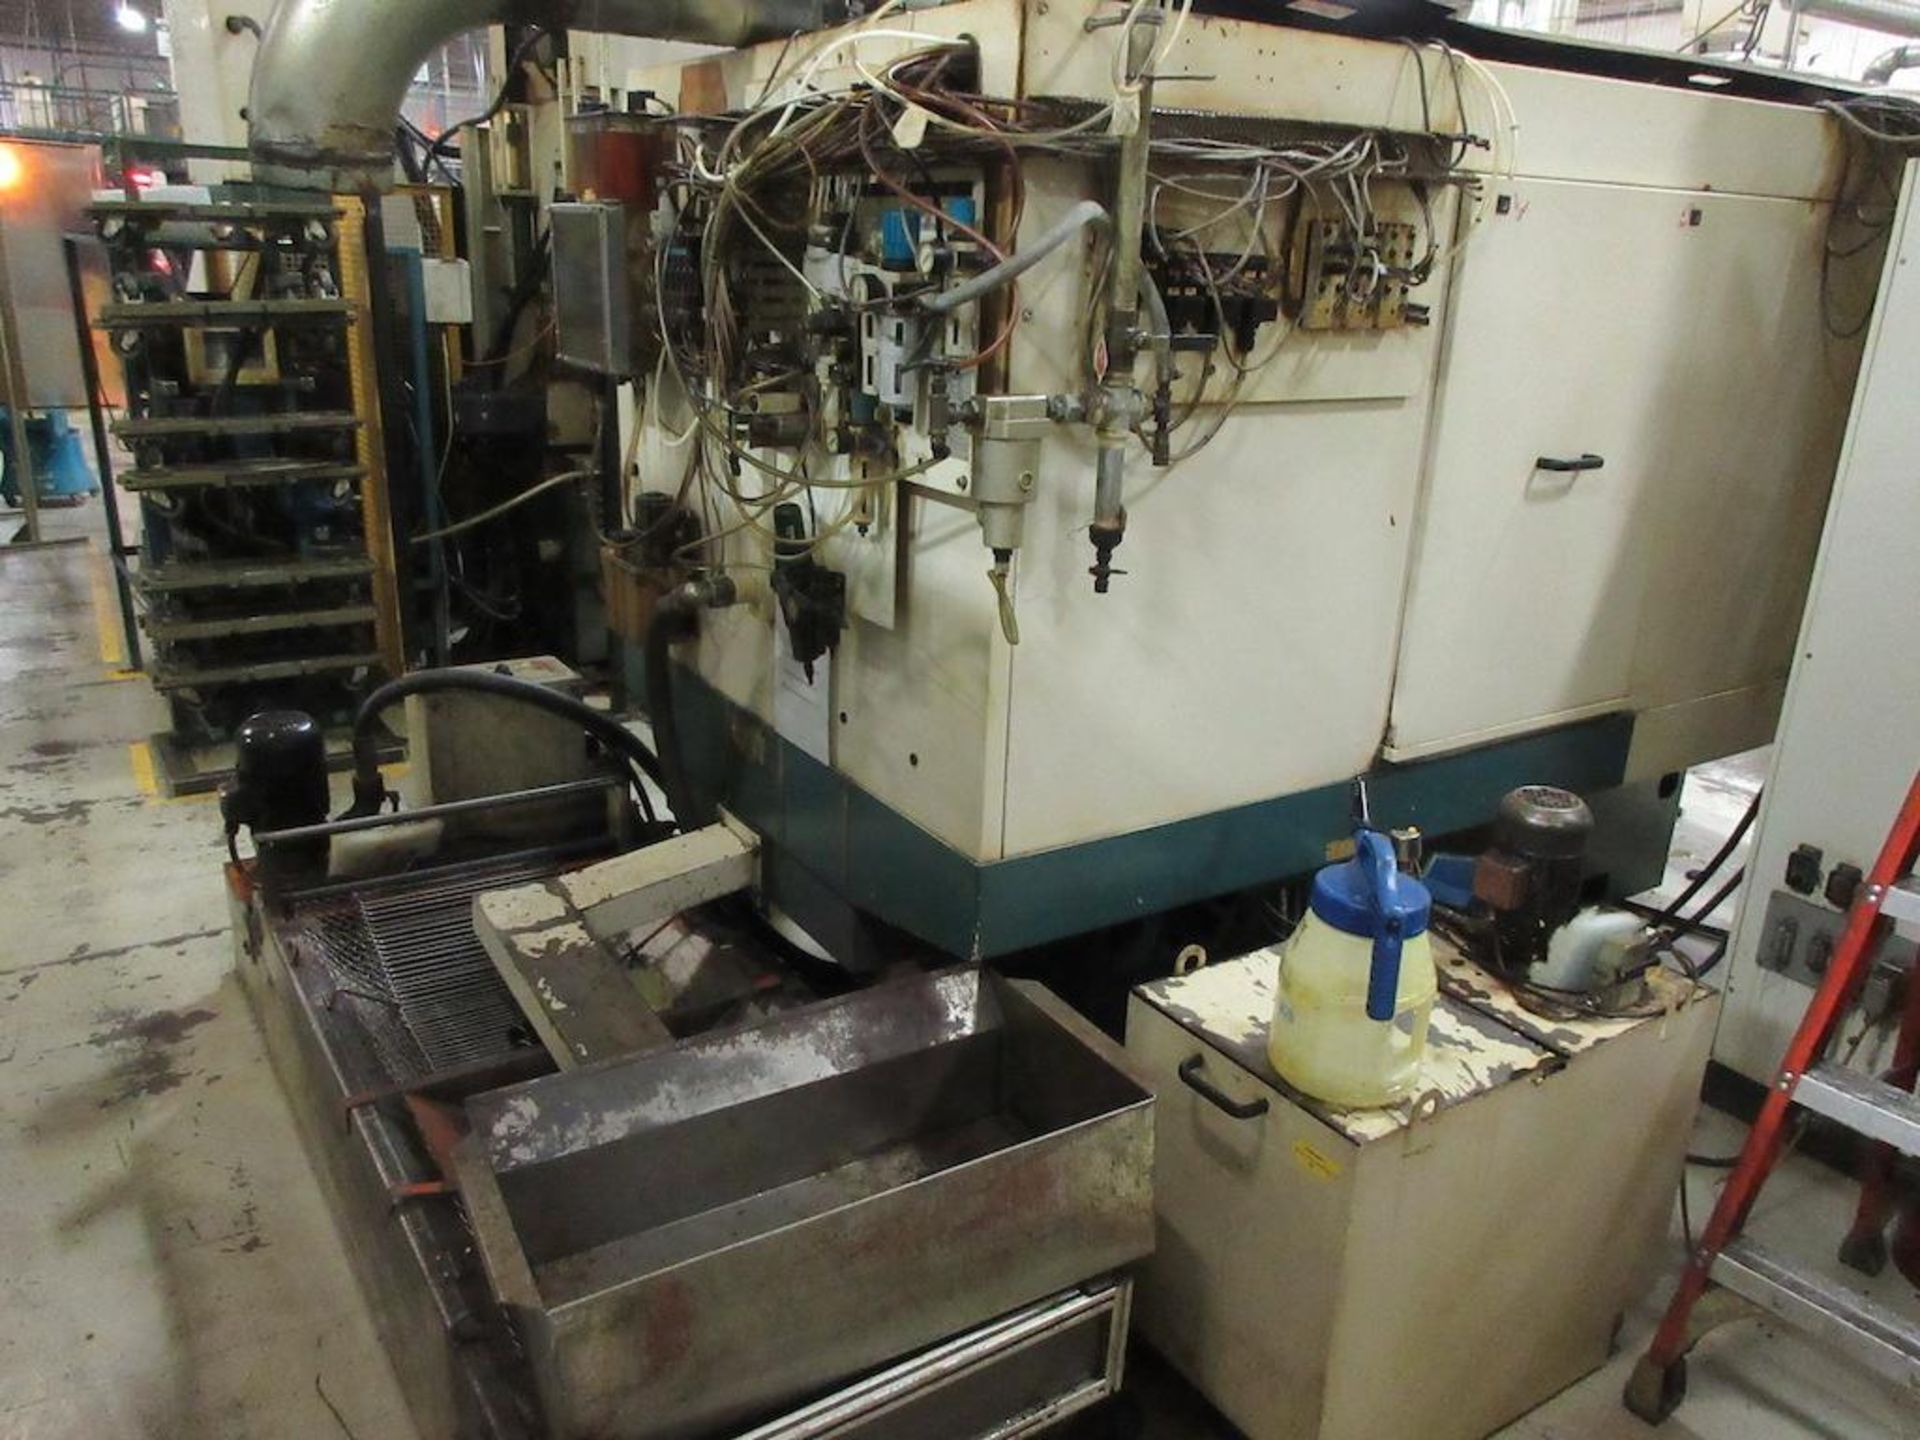 2006 STUDER, CNC Grinders, Model S151, High Frequency Drive Spindle, Swing diameter 14.17", center - Image 7 of 9